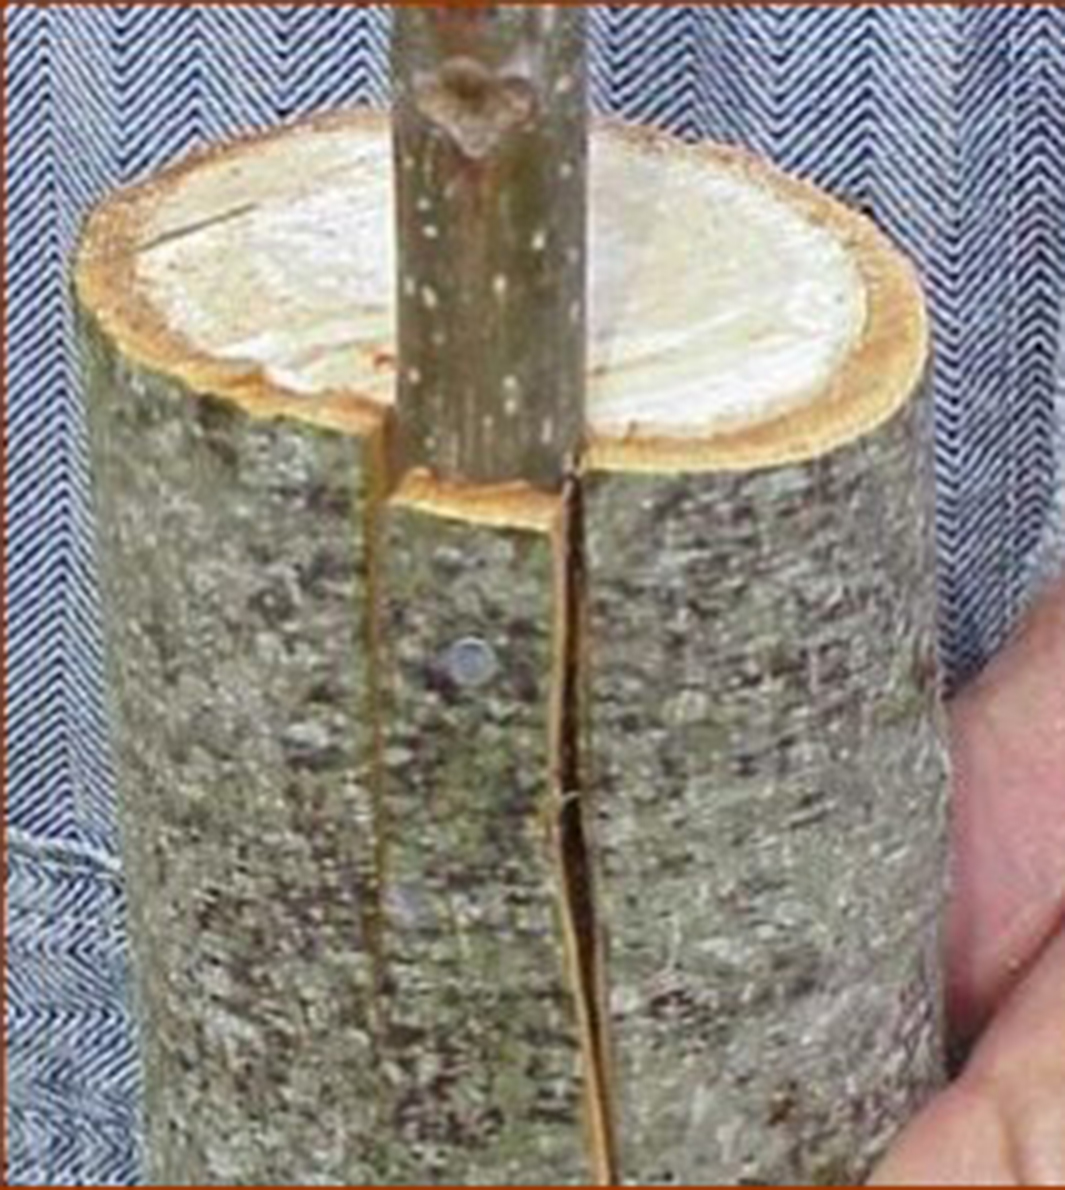 A finished bark graft shows the new scion branch secured by a small nail in the cut made in the larger branch.